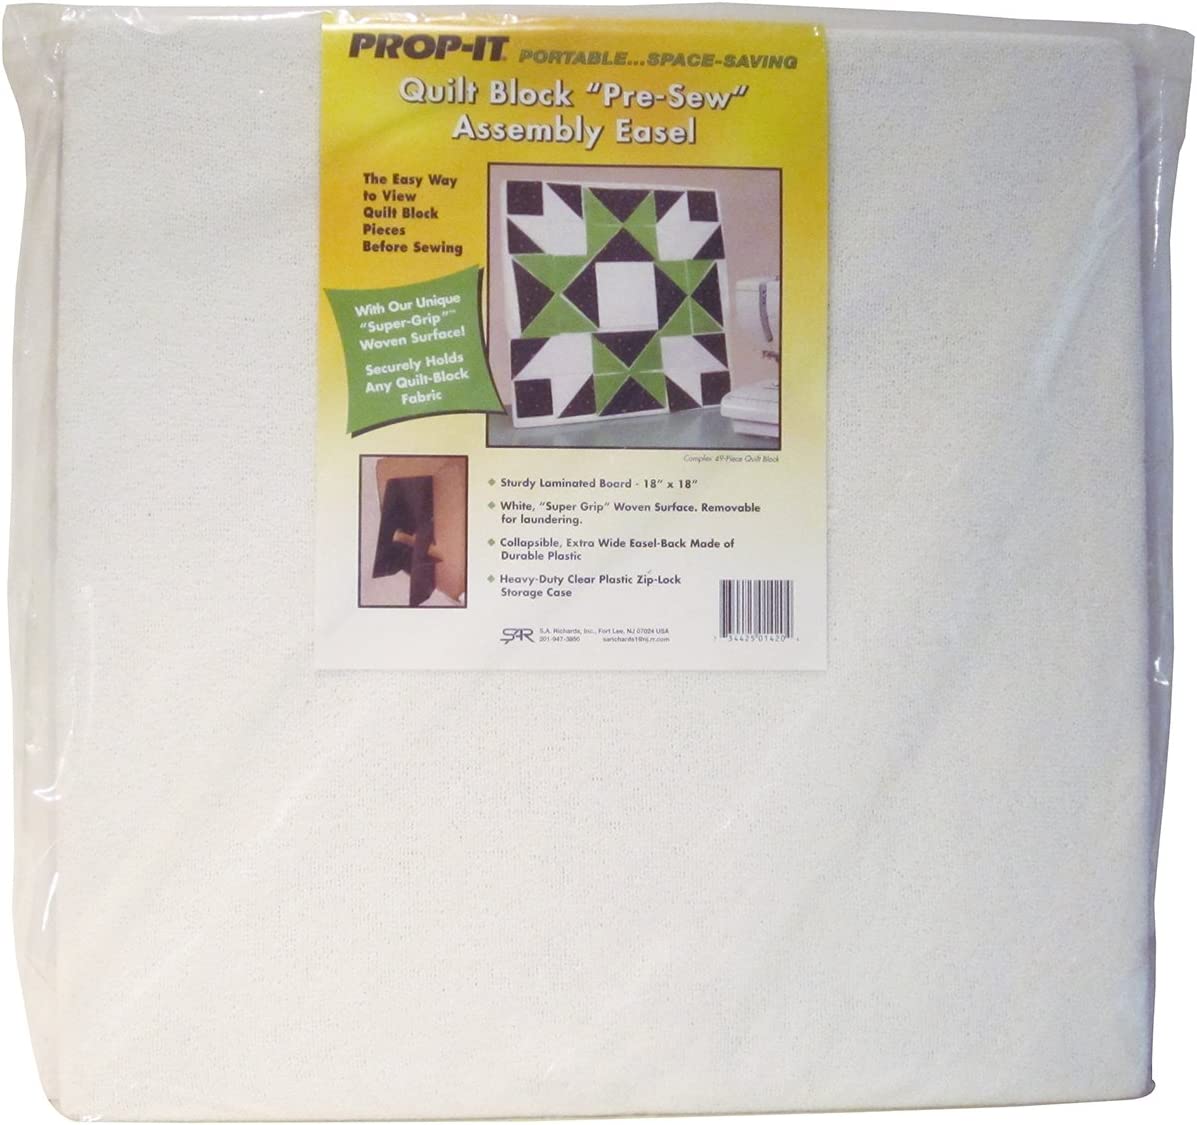 S.A. RICHARDS Prop-IT Quilt Block Pre-Sew Assembly Easel